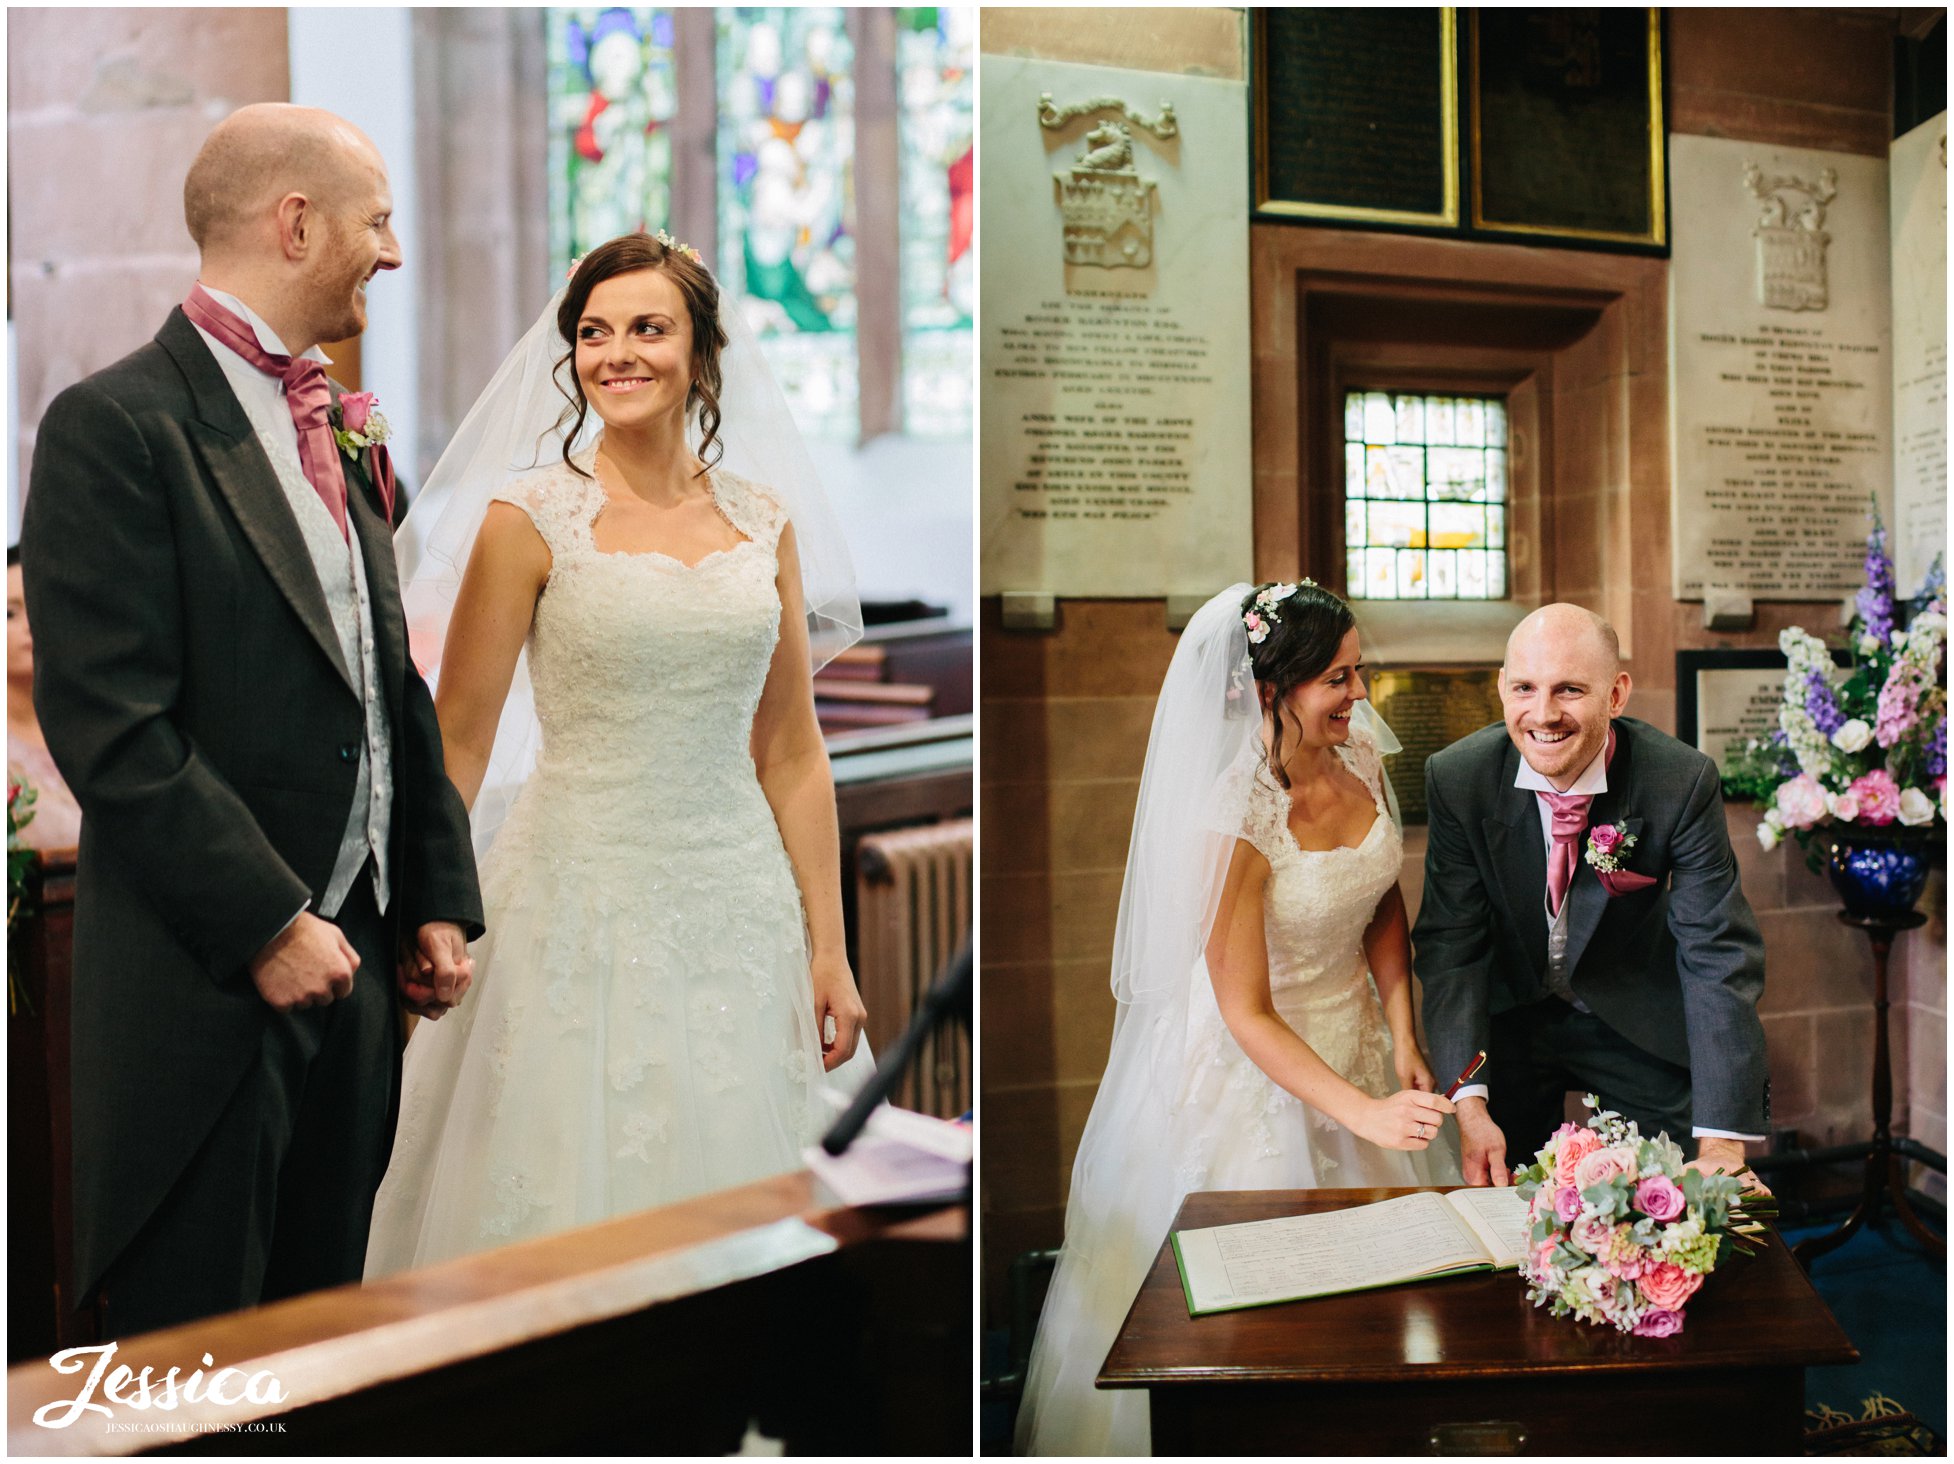 bride & groom during their ceremony at farndon church